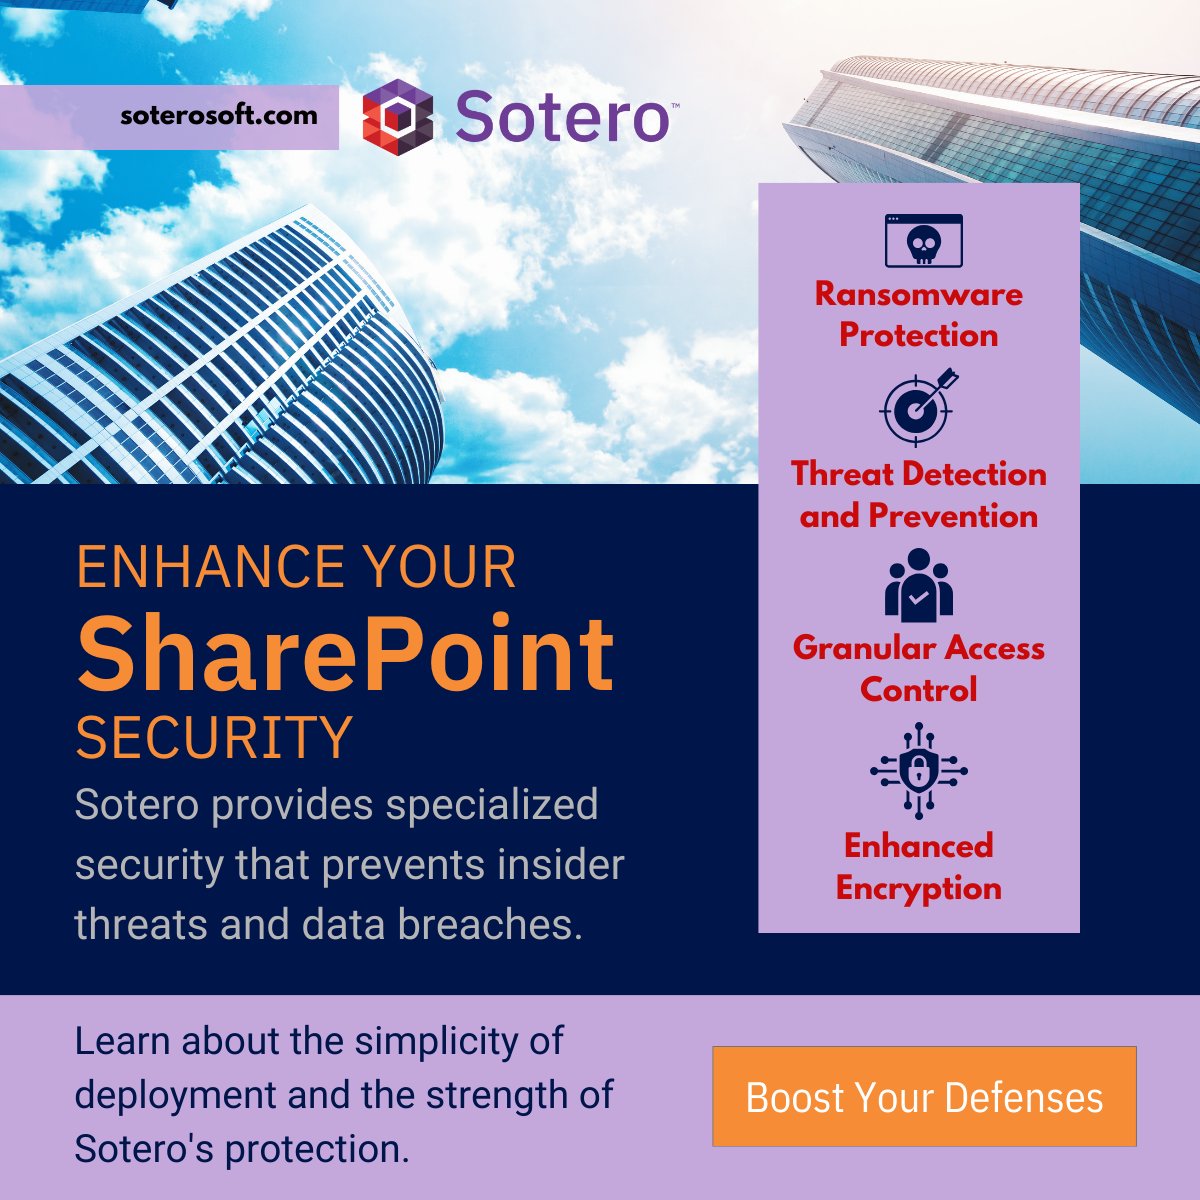 🛡️ Strengthen SharePoint security with Sotero! Hackers exploit platform security, making breaches a nightmare. Sotero fortifies data protection to defend against threats. Act now to ensure business security! info.soterosoft.com/sharepoint-sec… #SharePoint